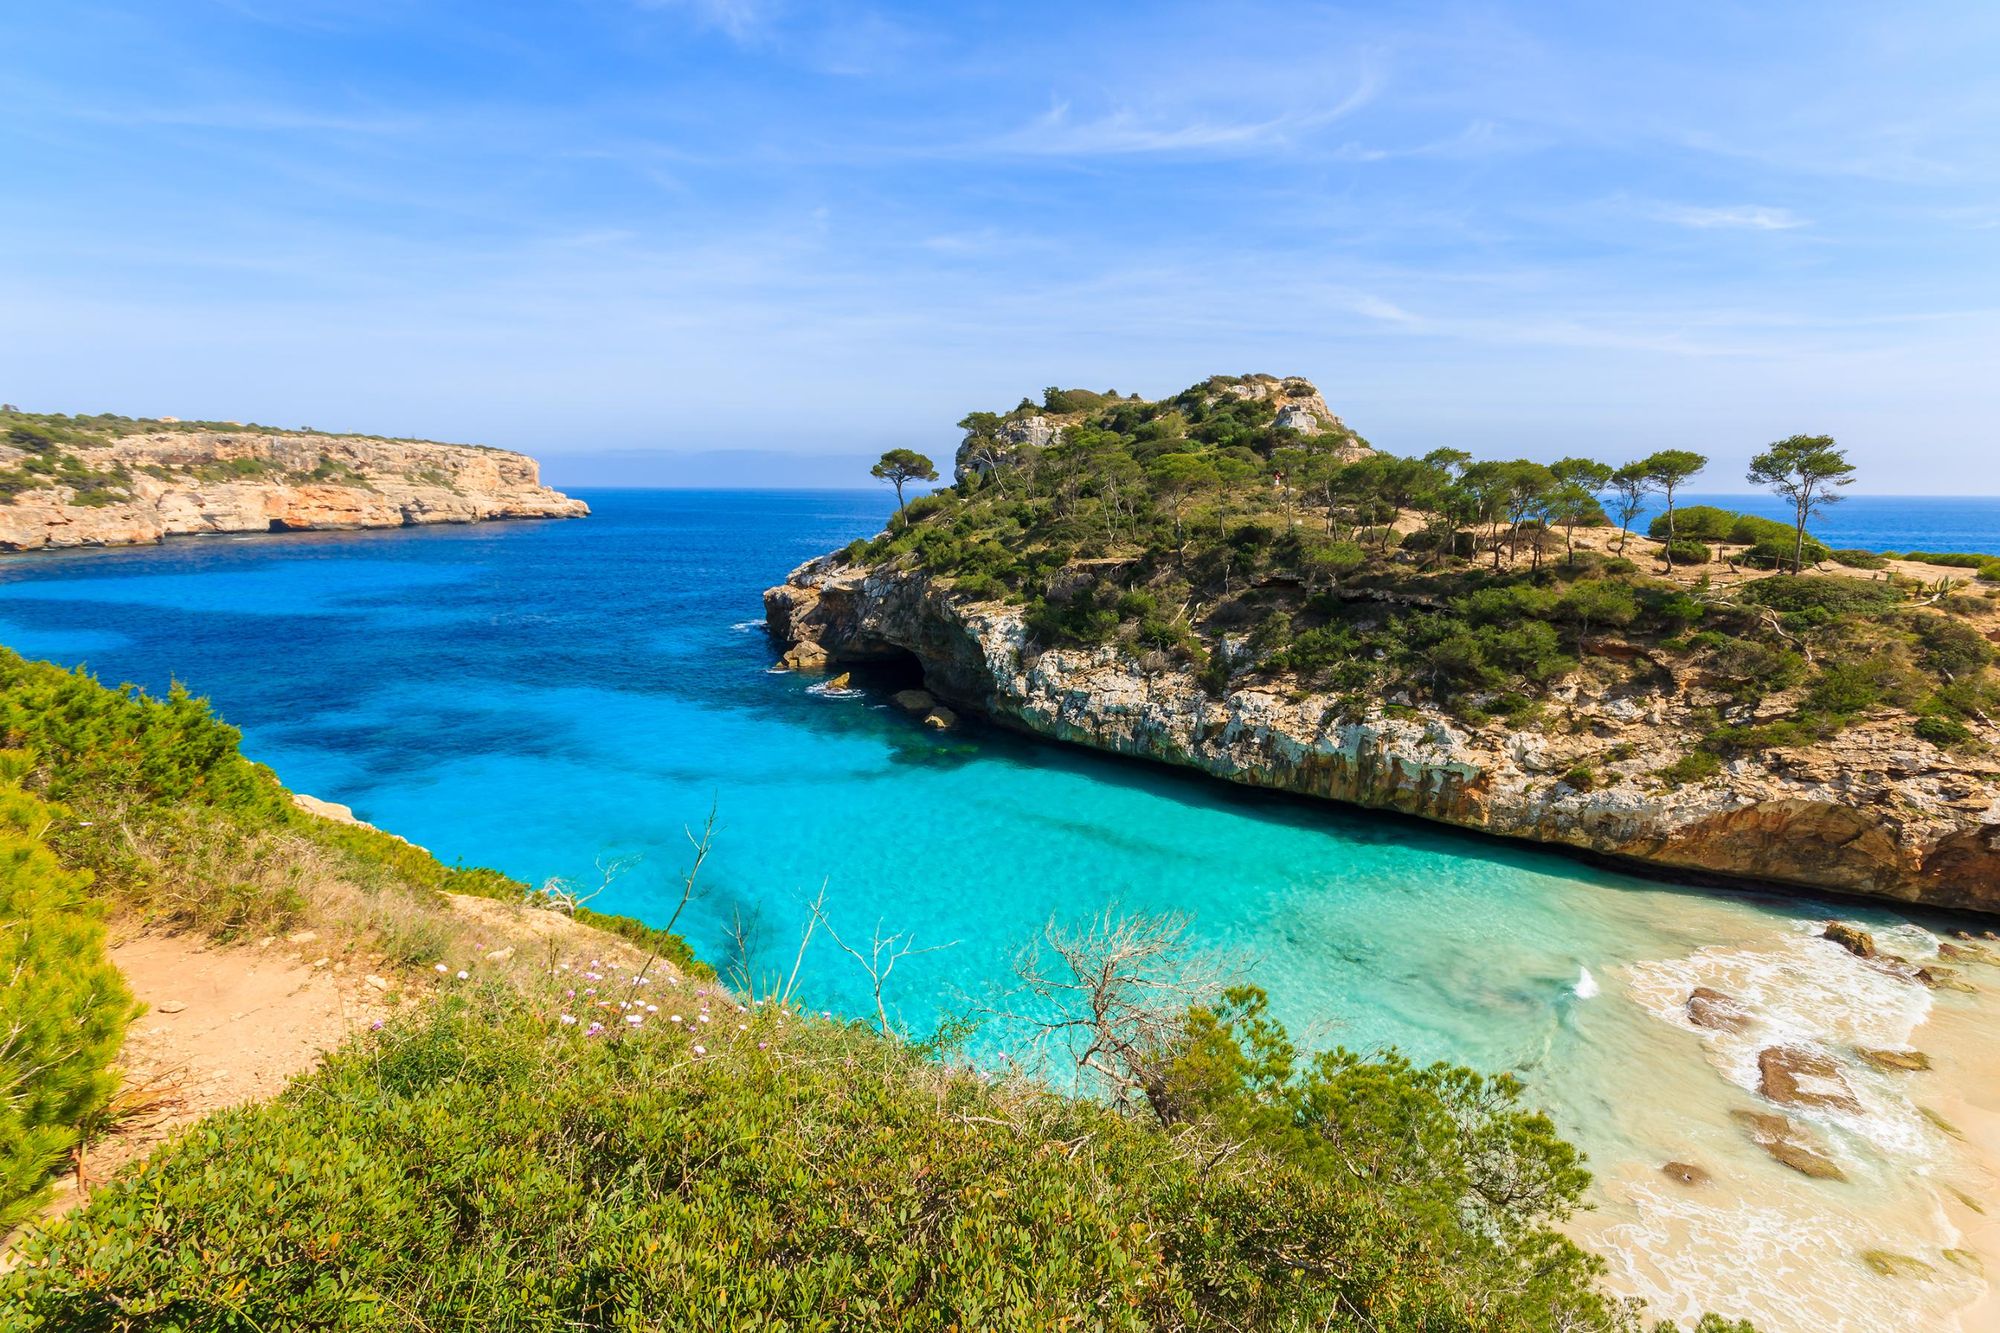 Majorca is the largest island in the Balearic Islands, which are part of Spain and located in the Mediterranean. Photo: Getty